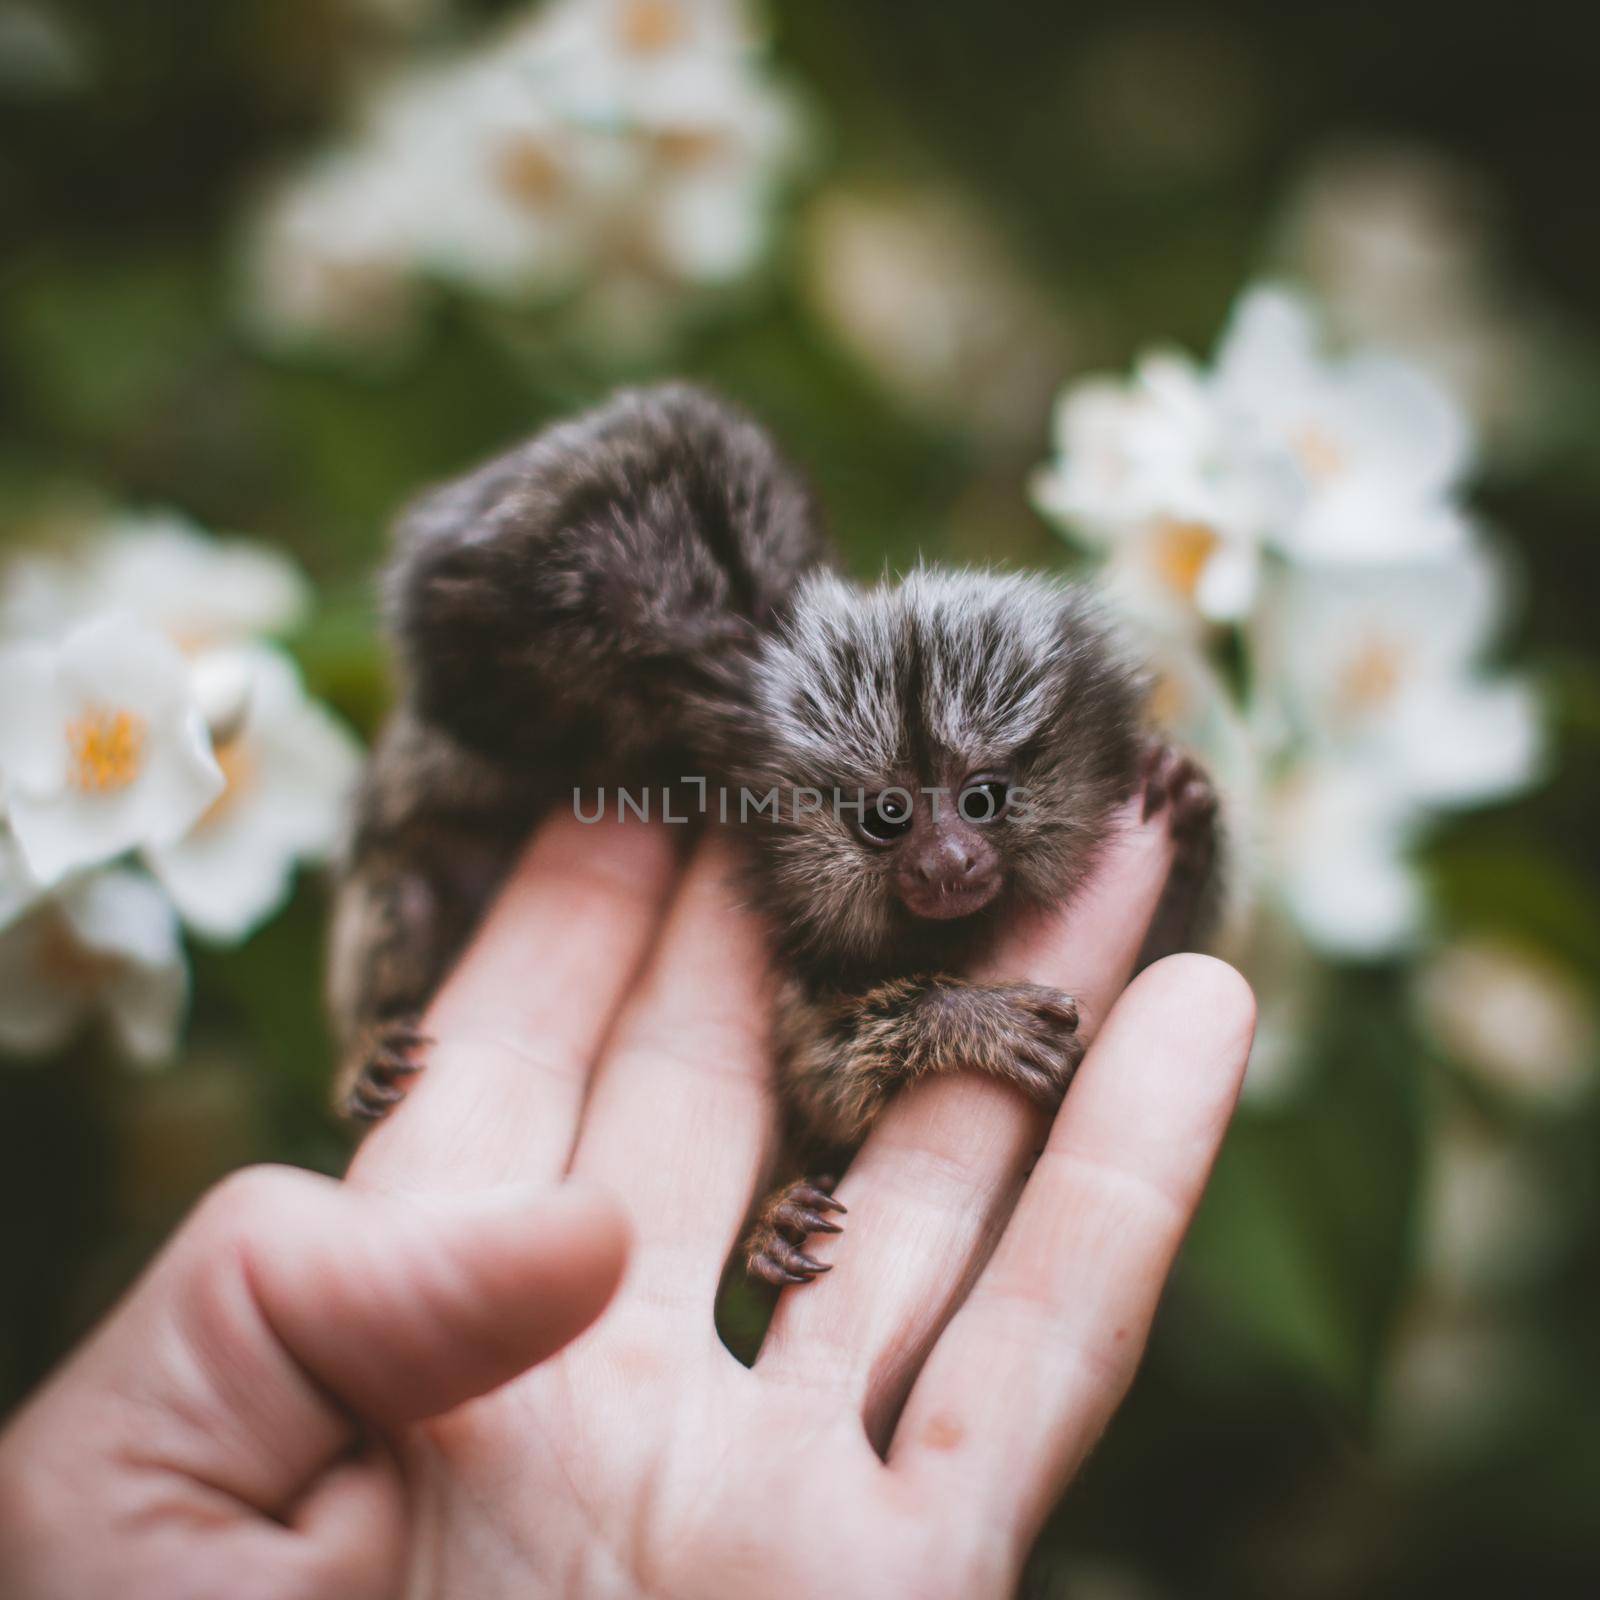 The common marmoset babies in summer garden on human hand by RosaJay